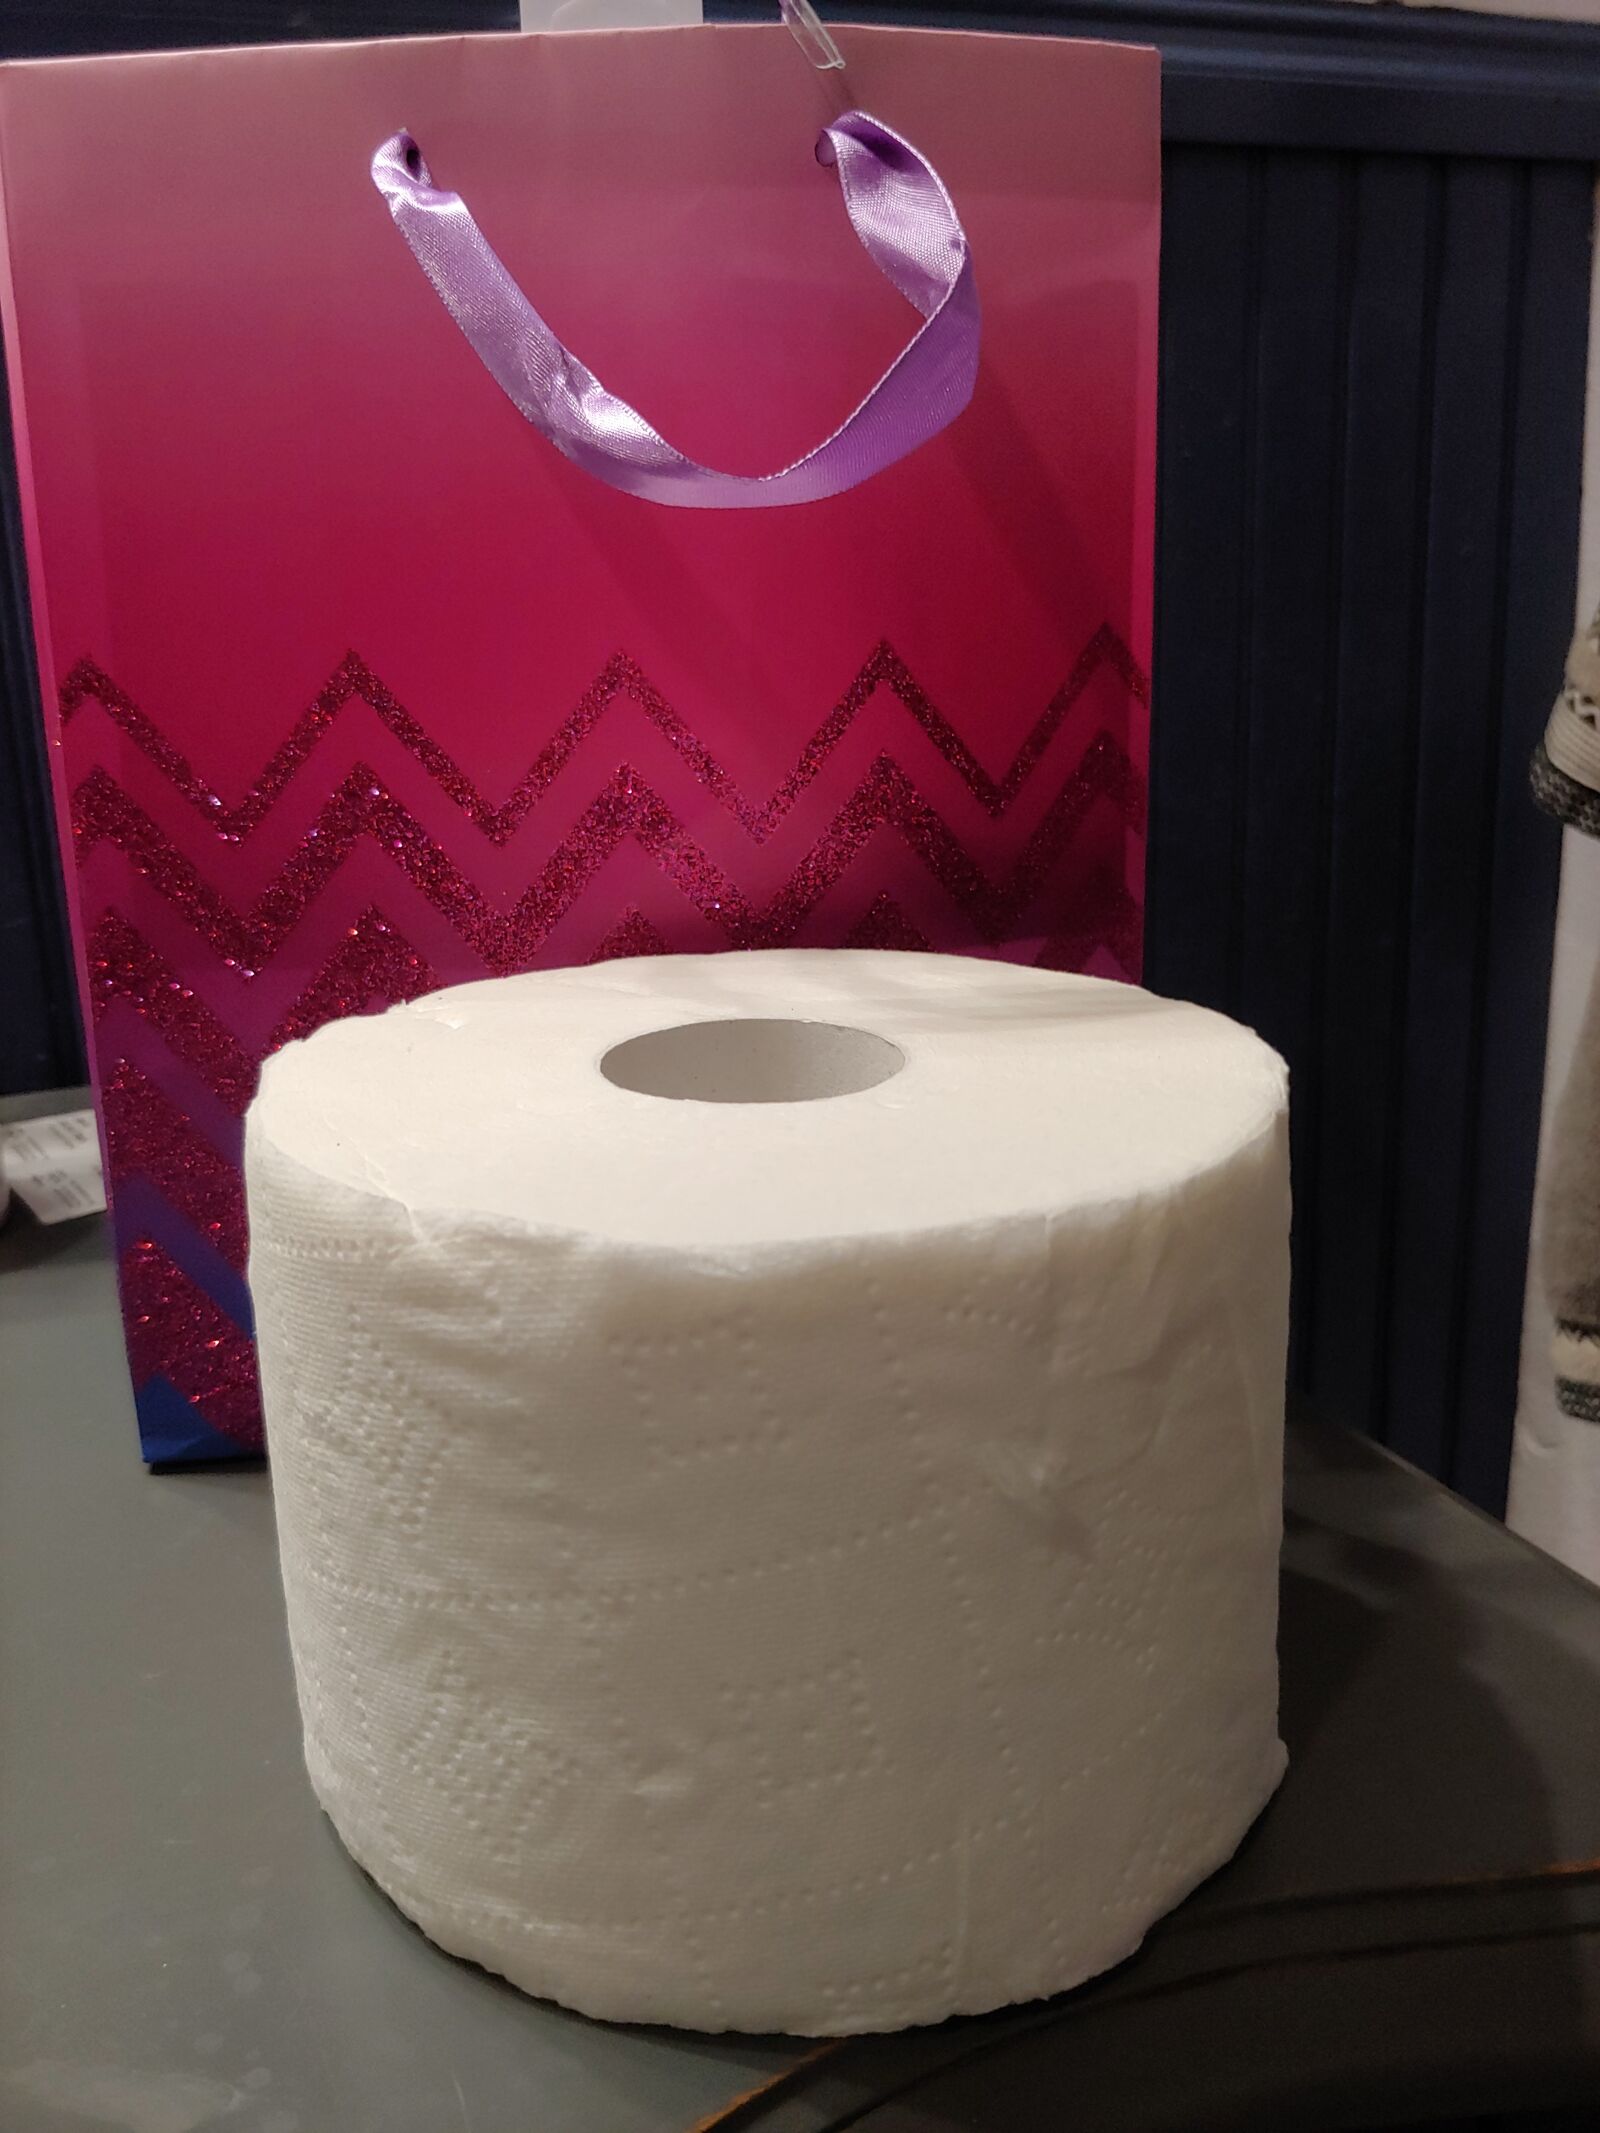 LG G7 THINQ sample photo. Gift, toilet paper, pandemic photography